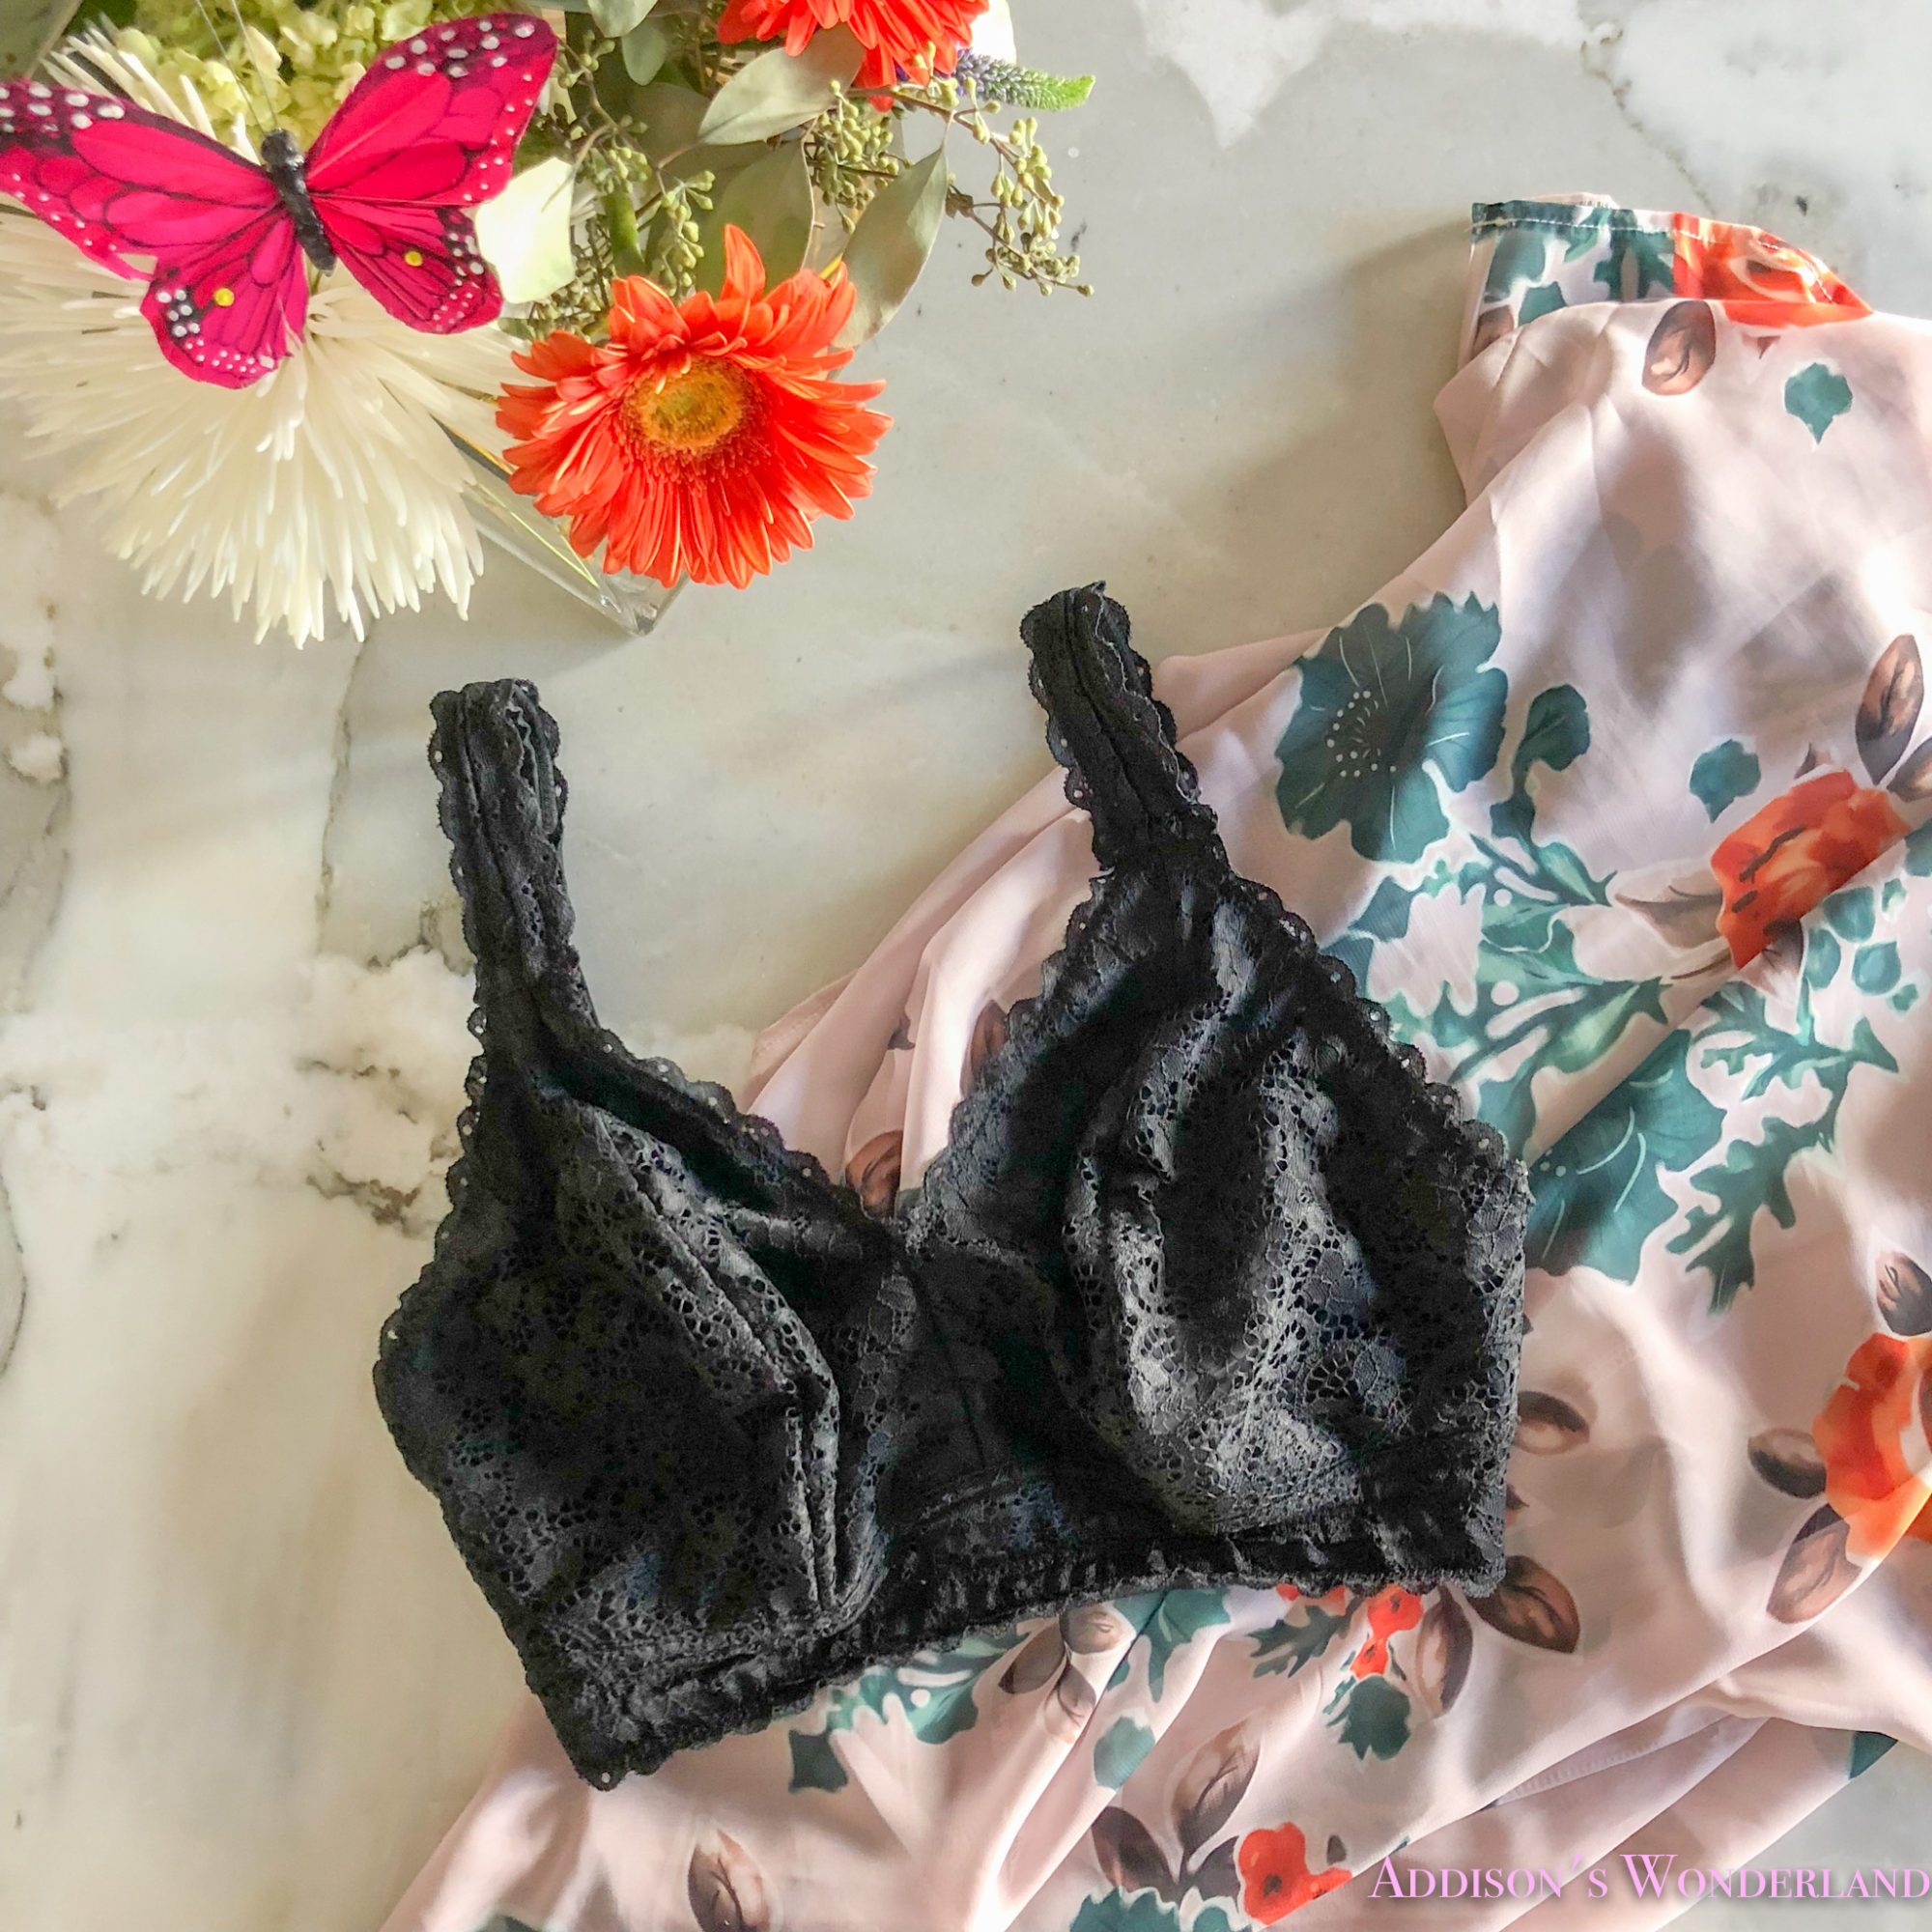 Hands Down the Most Supportive and Comfortable Lace Bralette